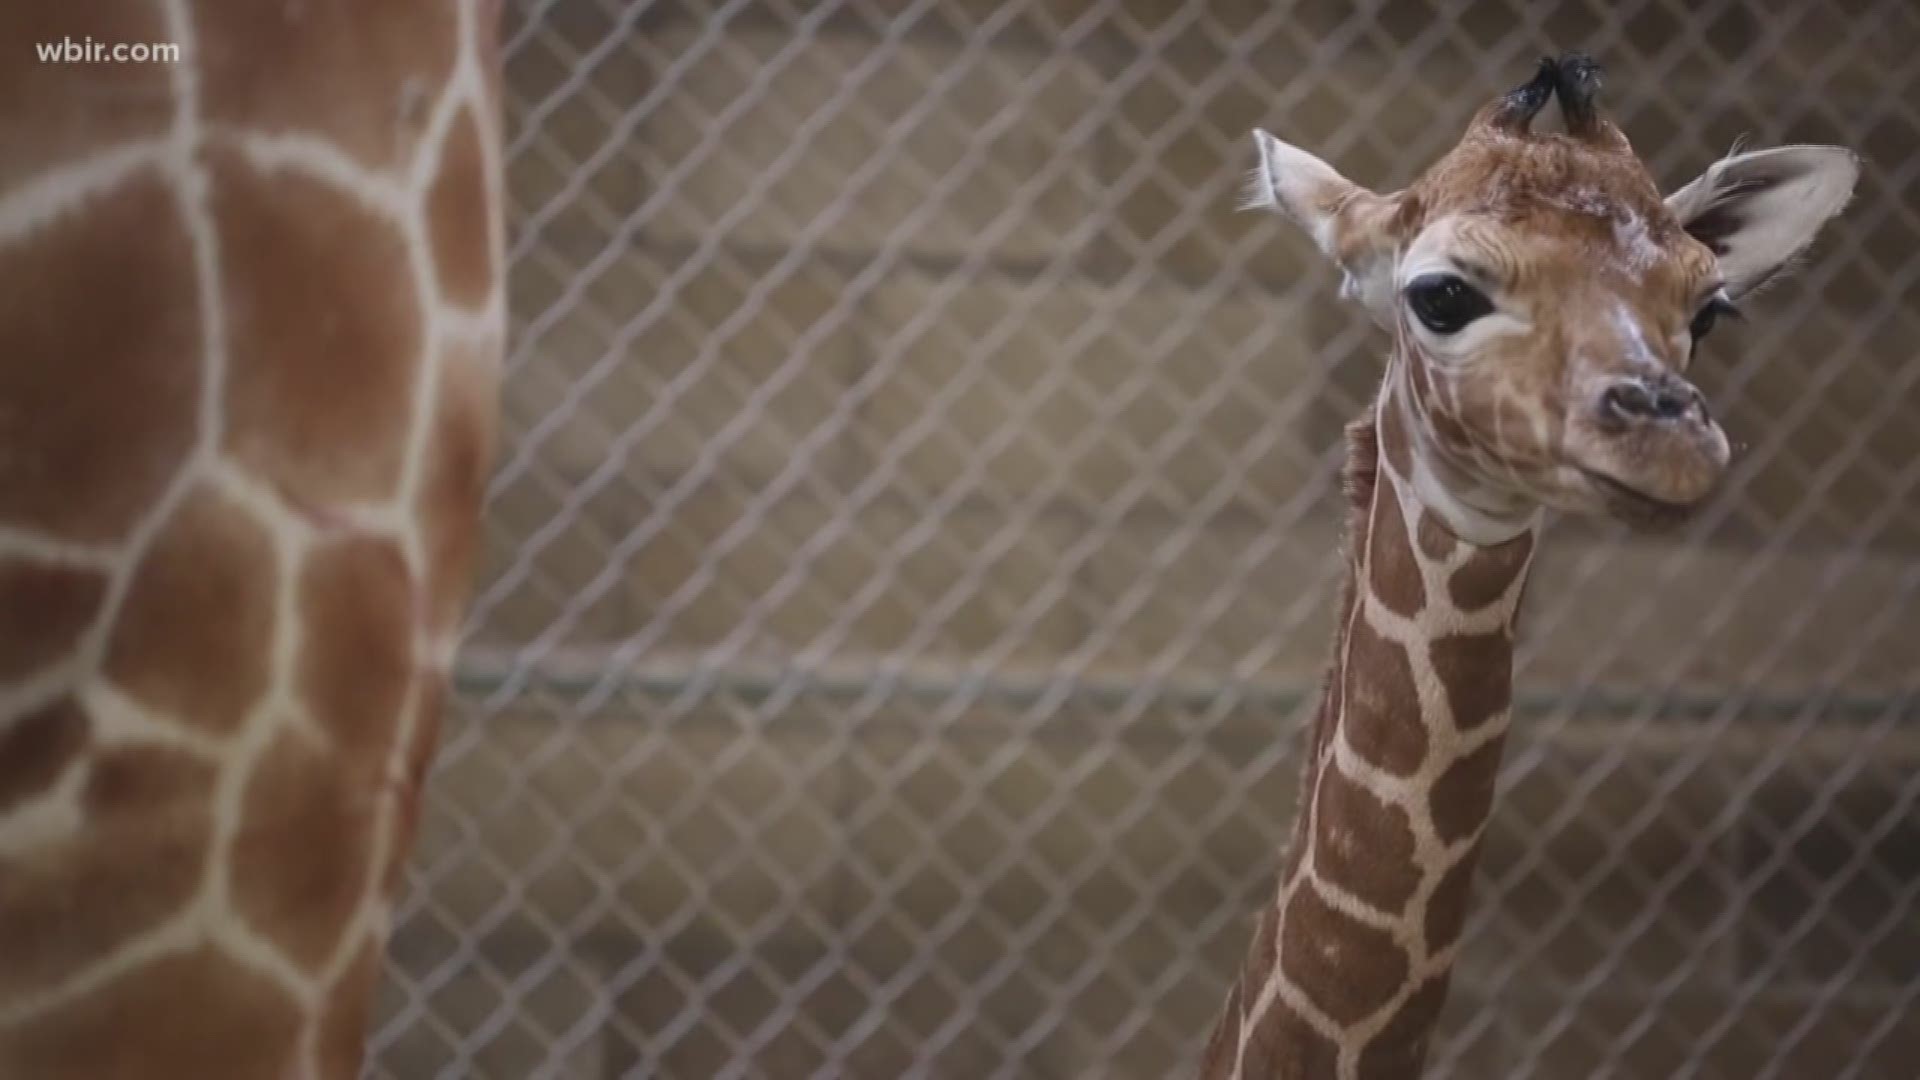 Zoo Knoxville is on Cloud 9 after Frances the giraffe welcomed a calf in the early hours of July 1. The calf was born with no help from zoo staff to first-time mom Frances. This is also the first offspring for three-year-old Frances and 16-year-old male Jumbe. To learn more visit knoxvillezoo.org. July 2, 2019-4pm.